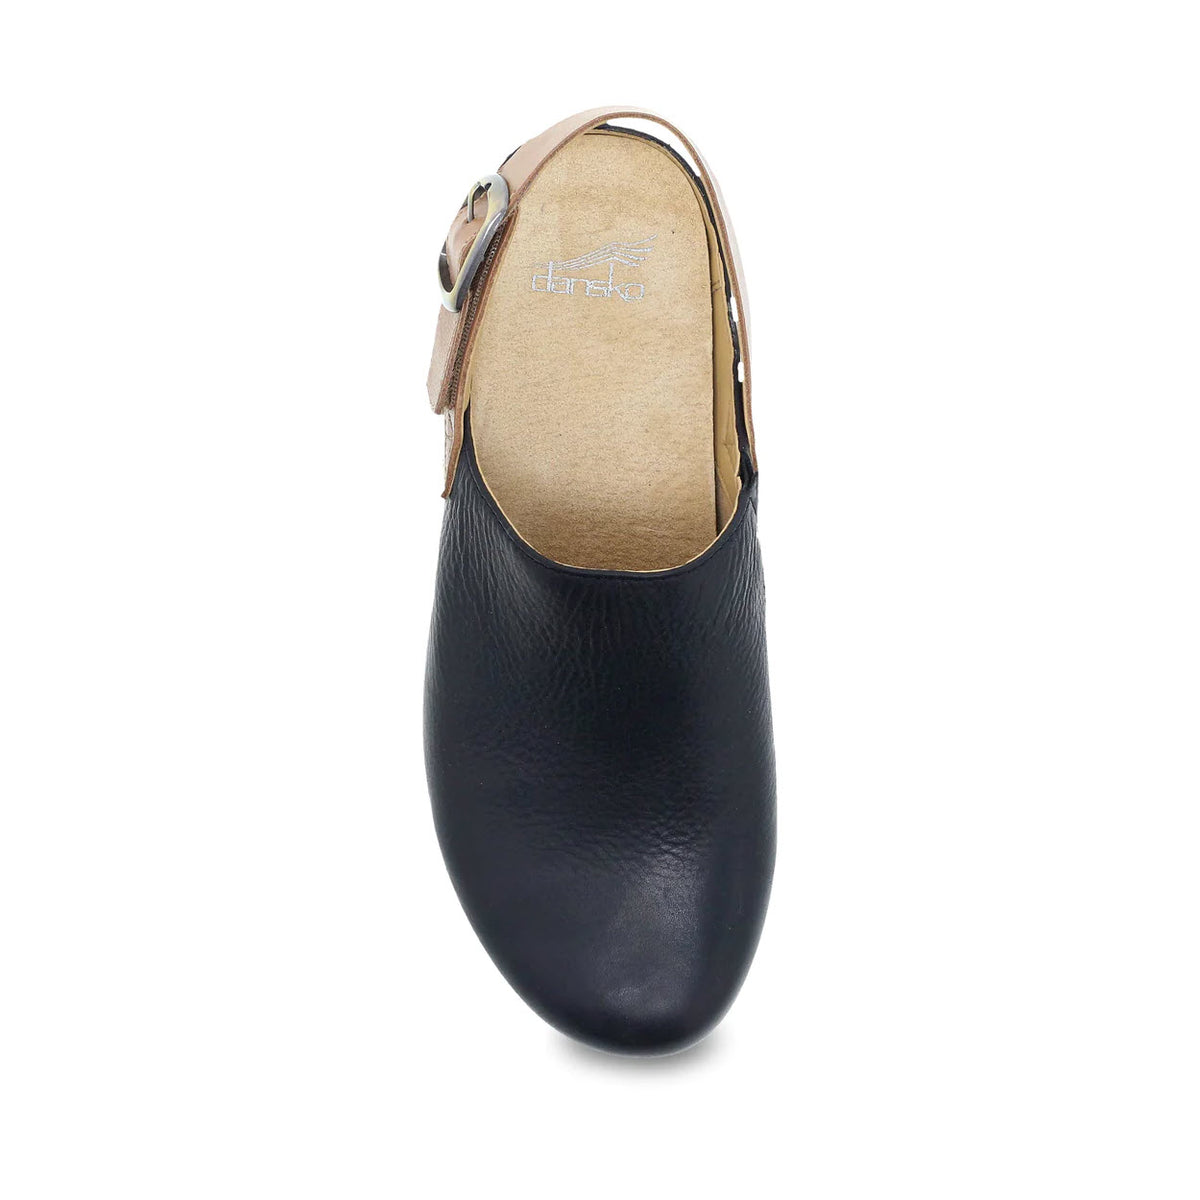 Top-down view of a Dansko Merrin Black Waxy shoe, crafted with high-quality leathers and featuring a strap closure.